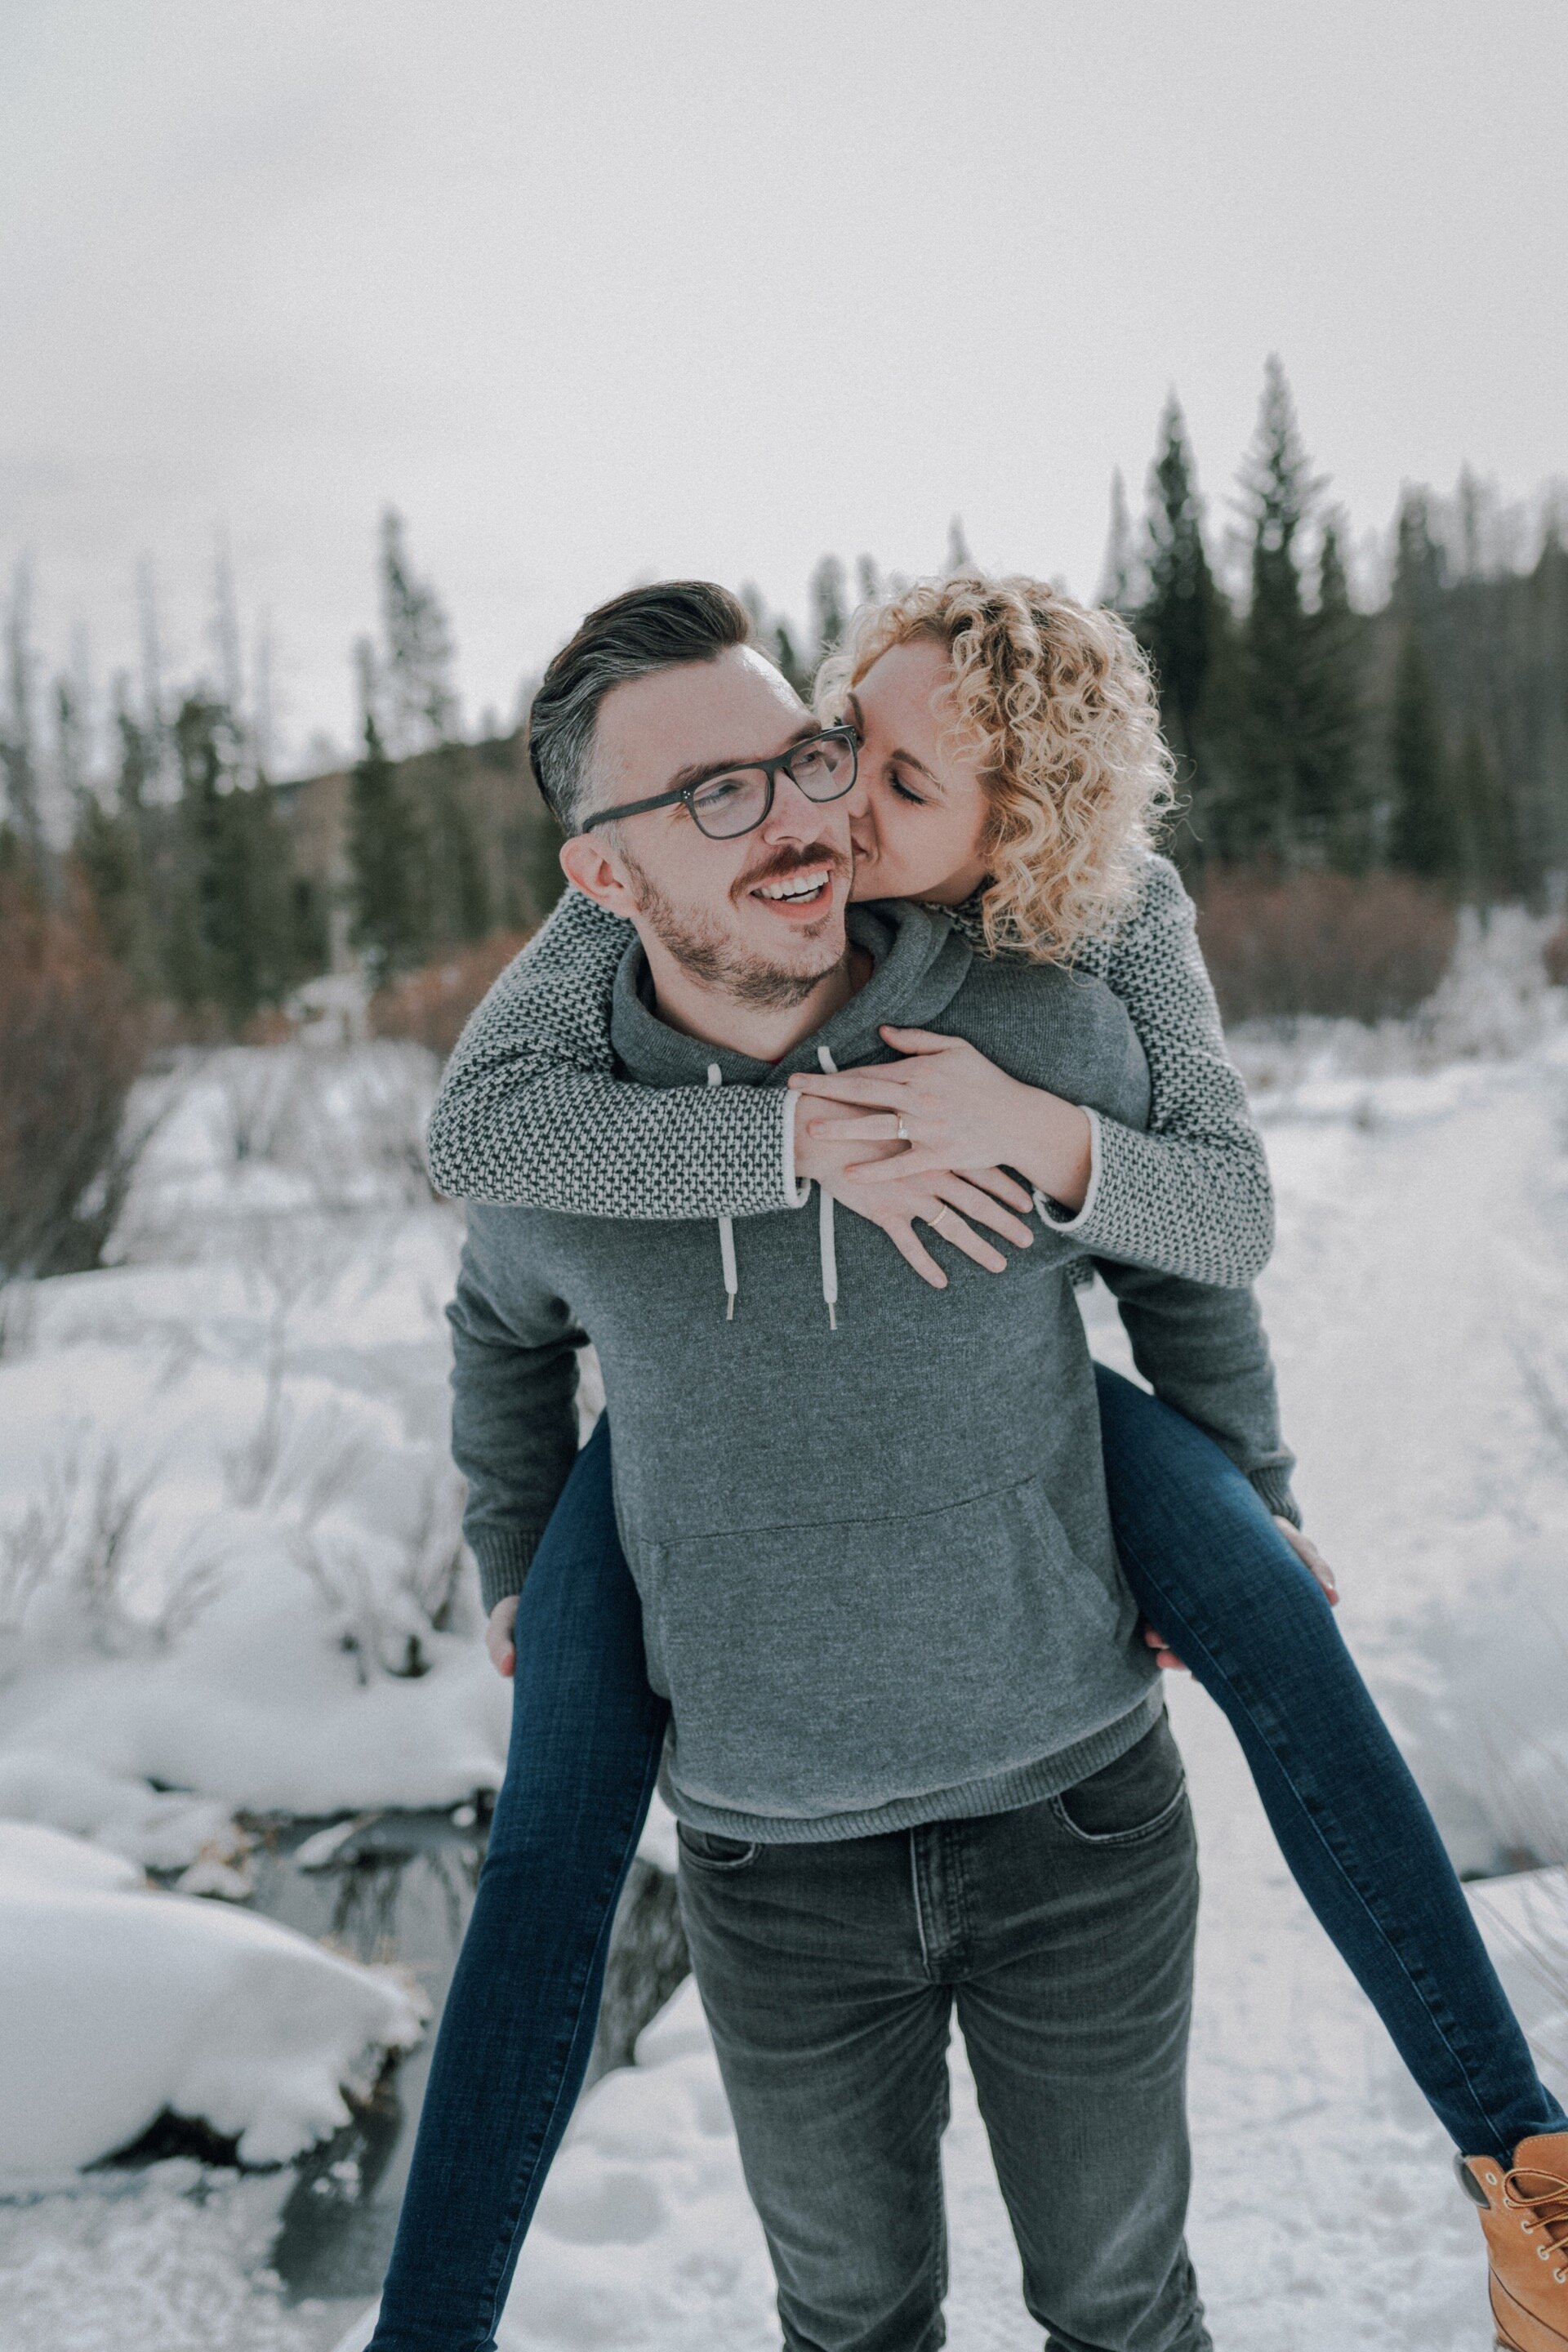 08_Kelsey&Taylor035_frisco_Photographer_engagement_Session_Co_Photography_Hannah_Minnesota_Snowy_Colorado_adventure_Mountain_ampe_engaged.jpg